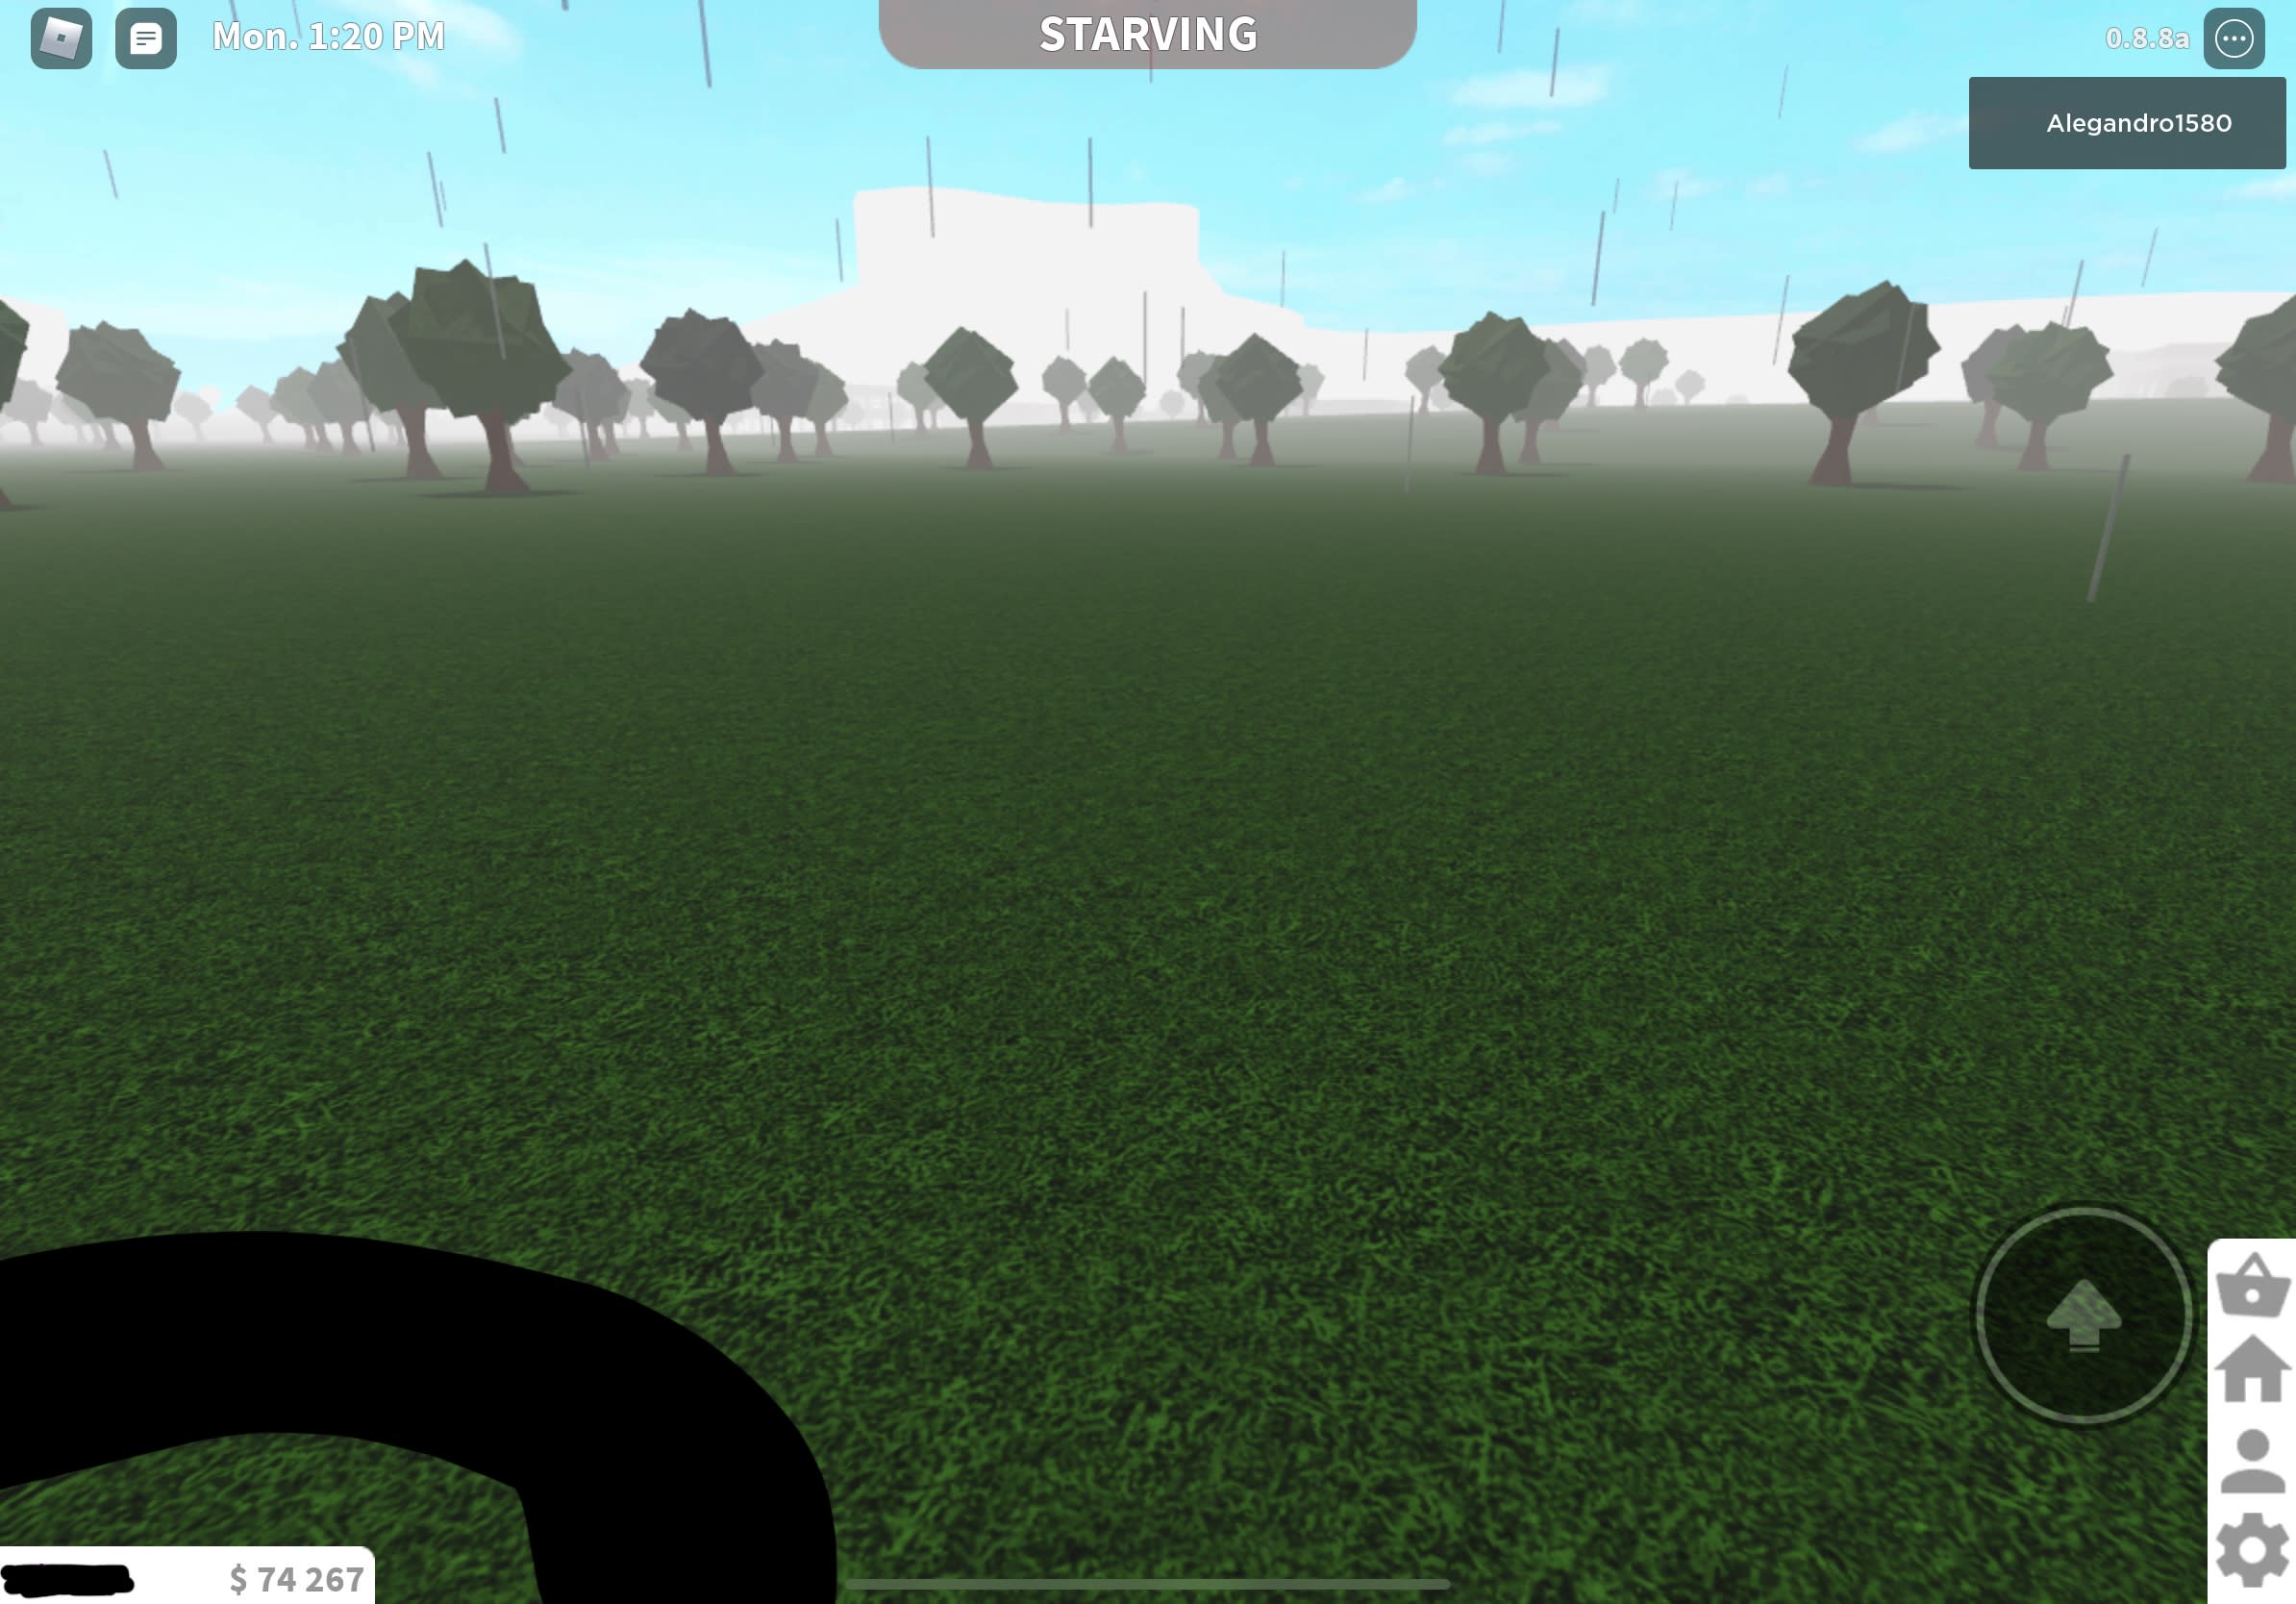 50k On Bloxburg The Roblox Game By Rodrig26 - games related to bloxburg on roblox